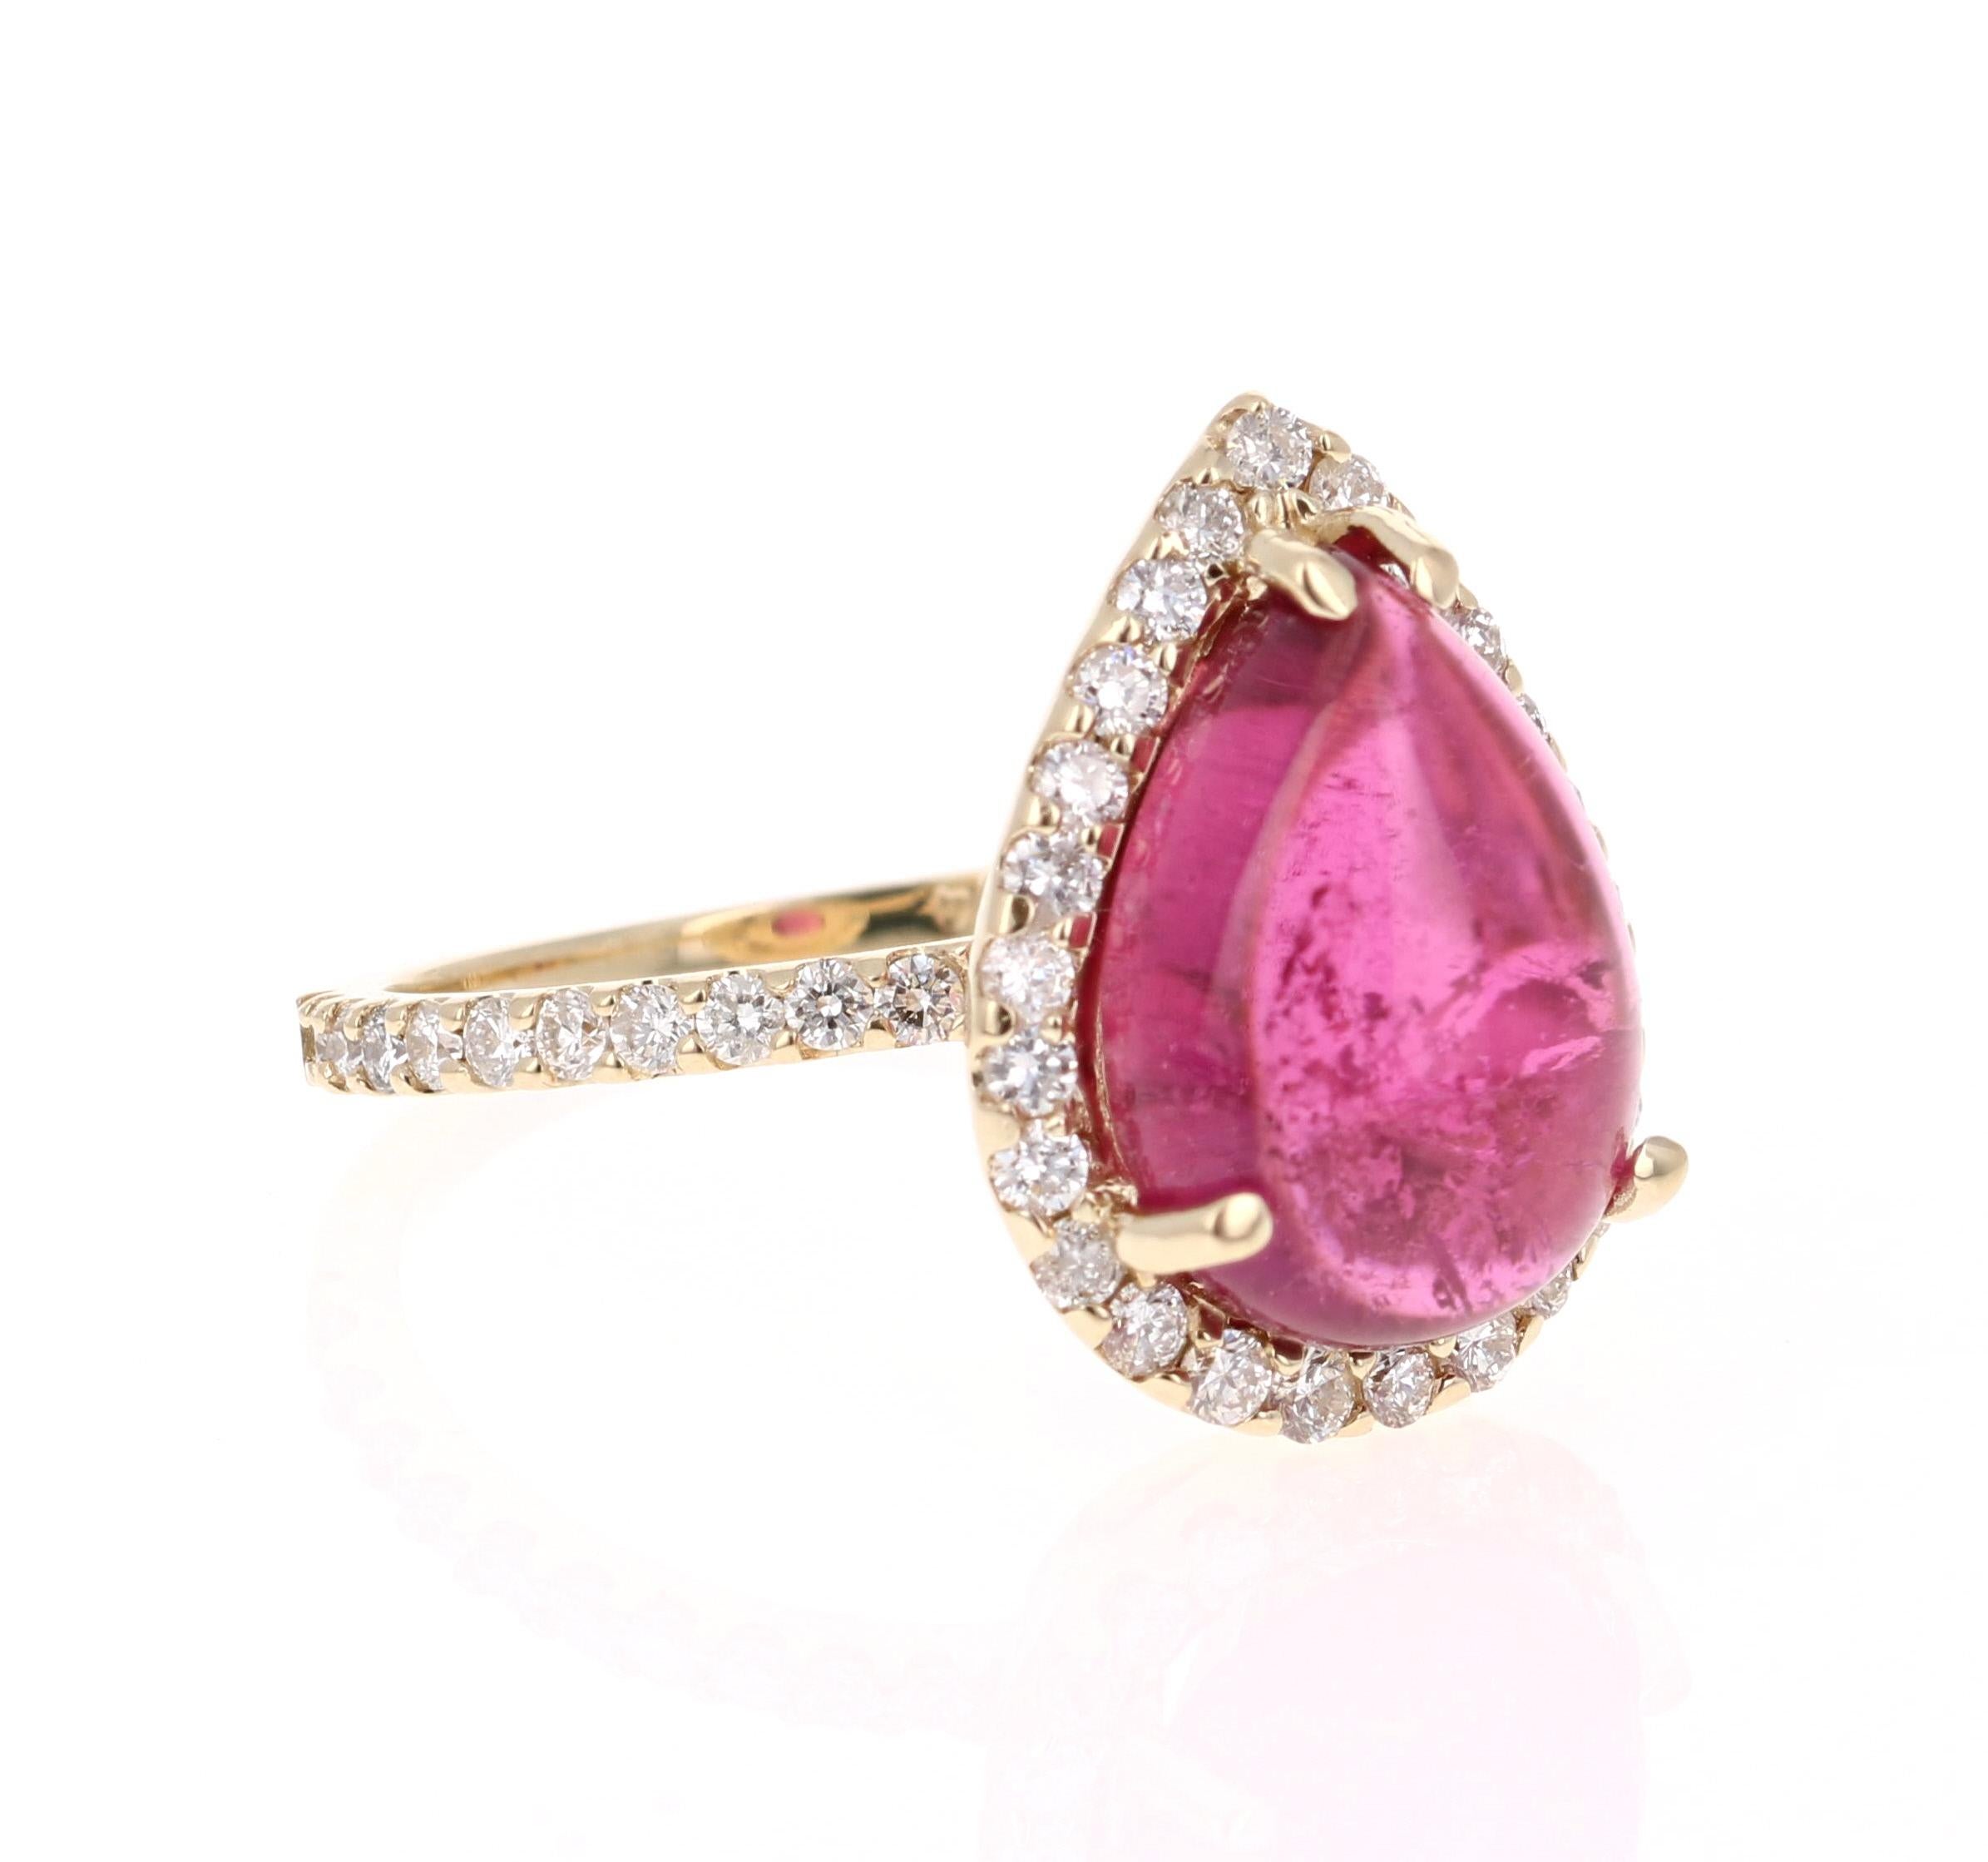 This ring has a simply gorgeous Pear Cut/Cabochon Pink Tourmaline that weighs 5.72 Carats. Floating around the tourmaline is a simple halo of 46 Round Cut Diamonds that weigh 0.79 Carats. The total carat weight of the ring is 6.51 Carats. 

This